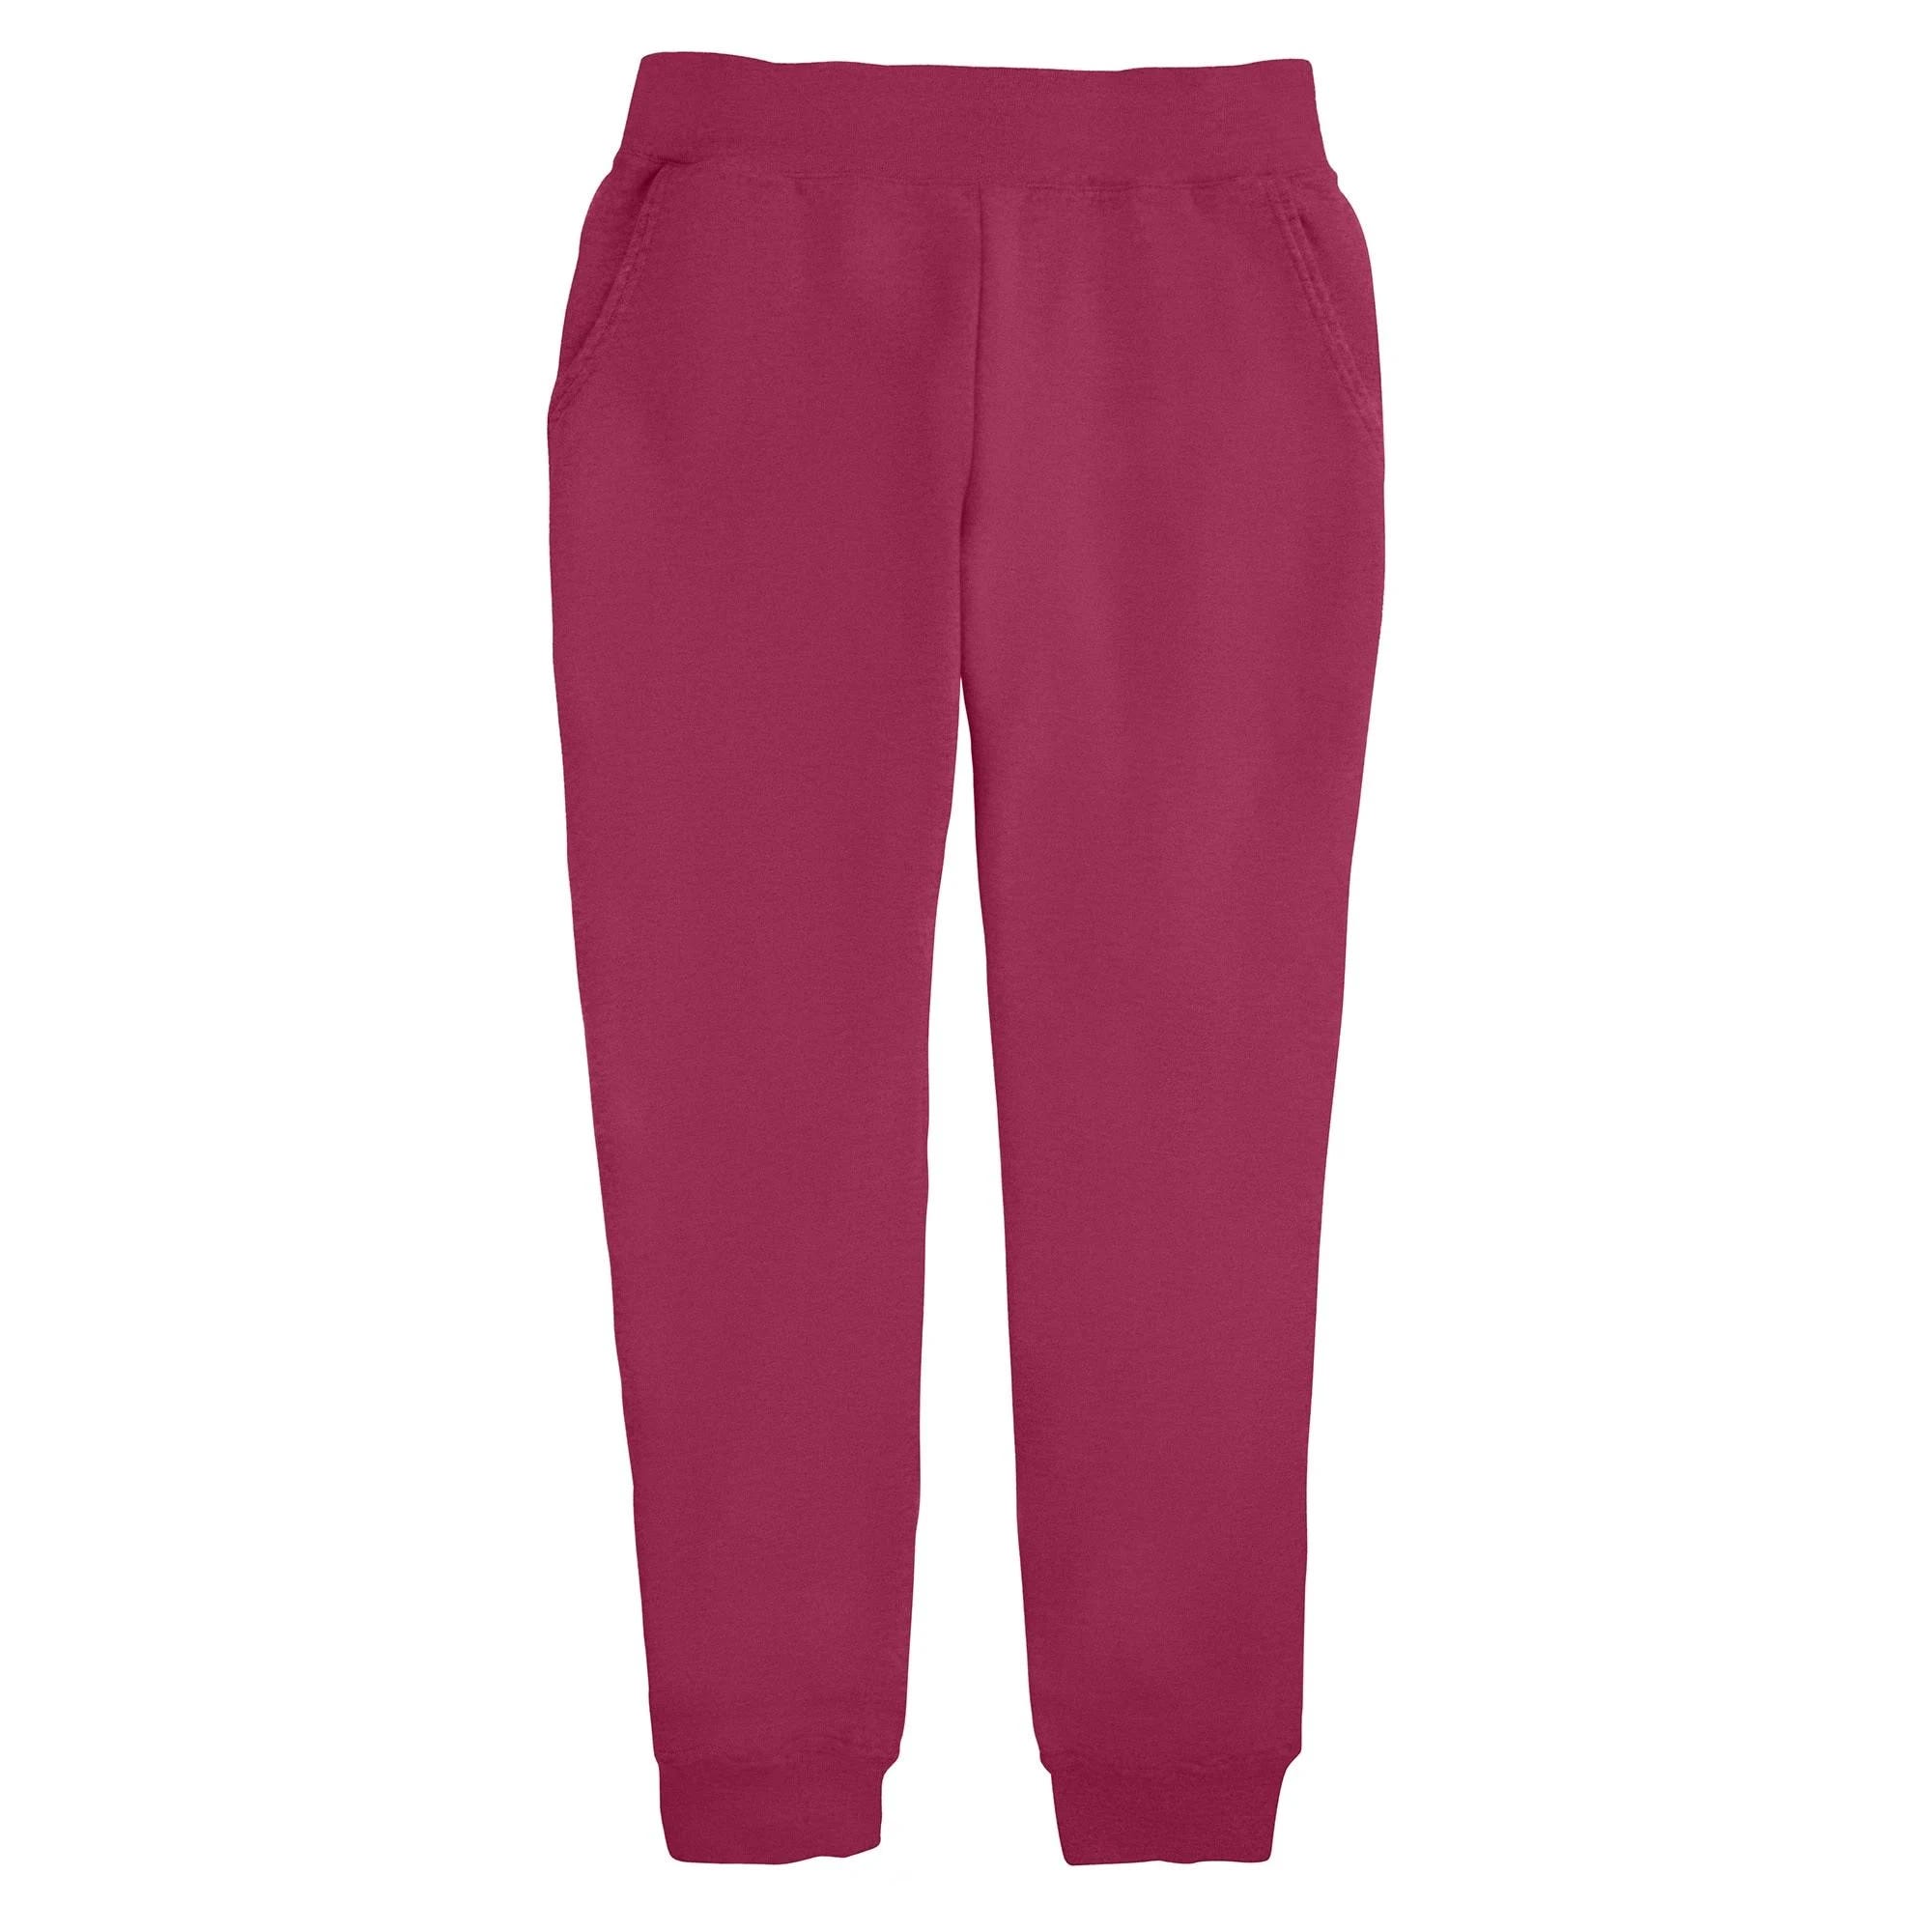 Comfortable Cotton Blend Joggers in Red: Classic Fit and Style for Women | Image